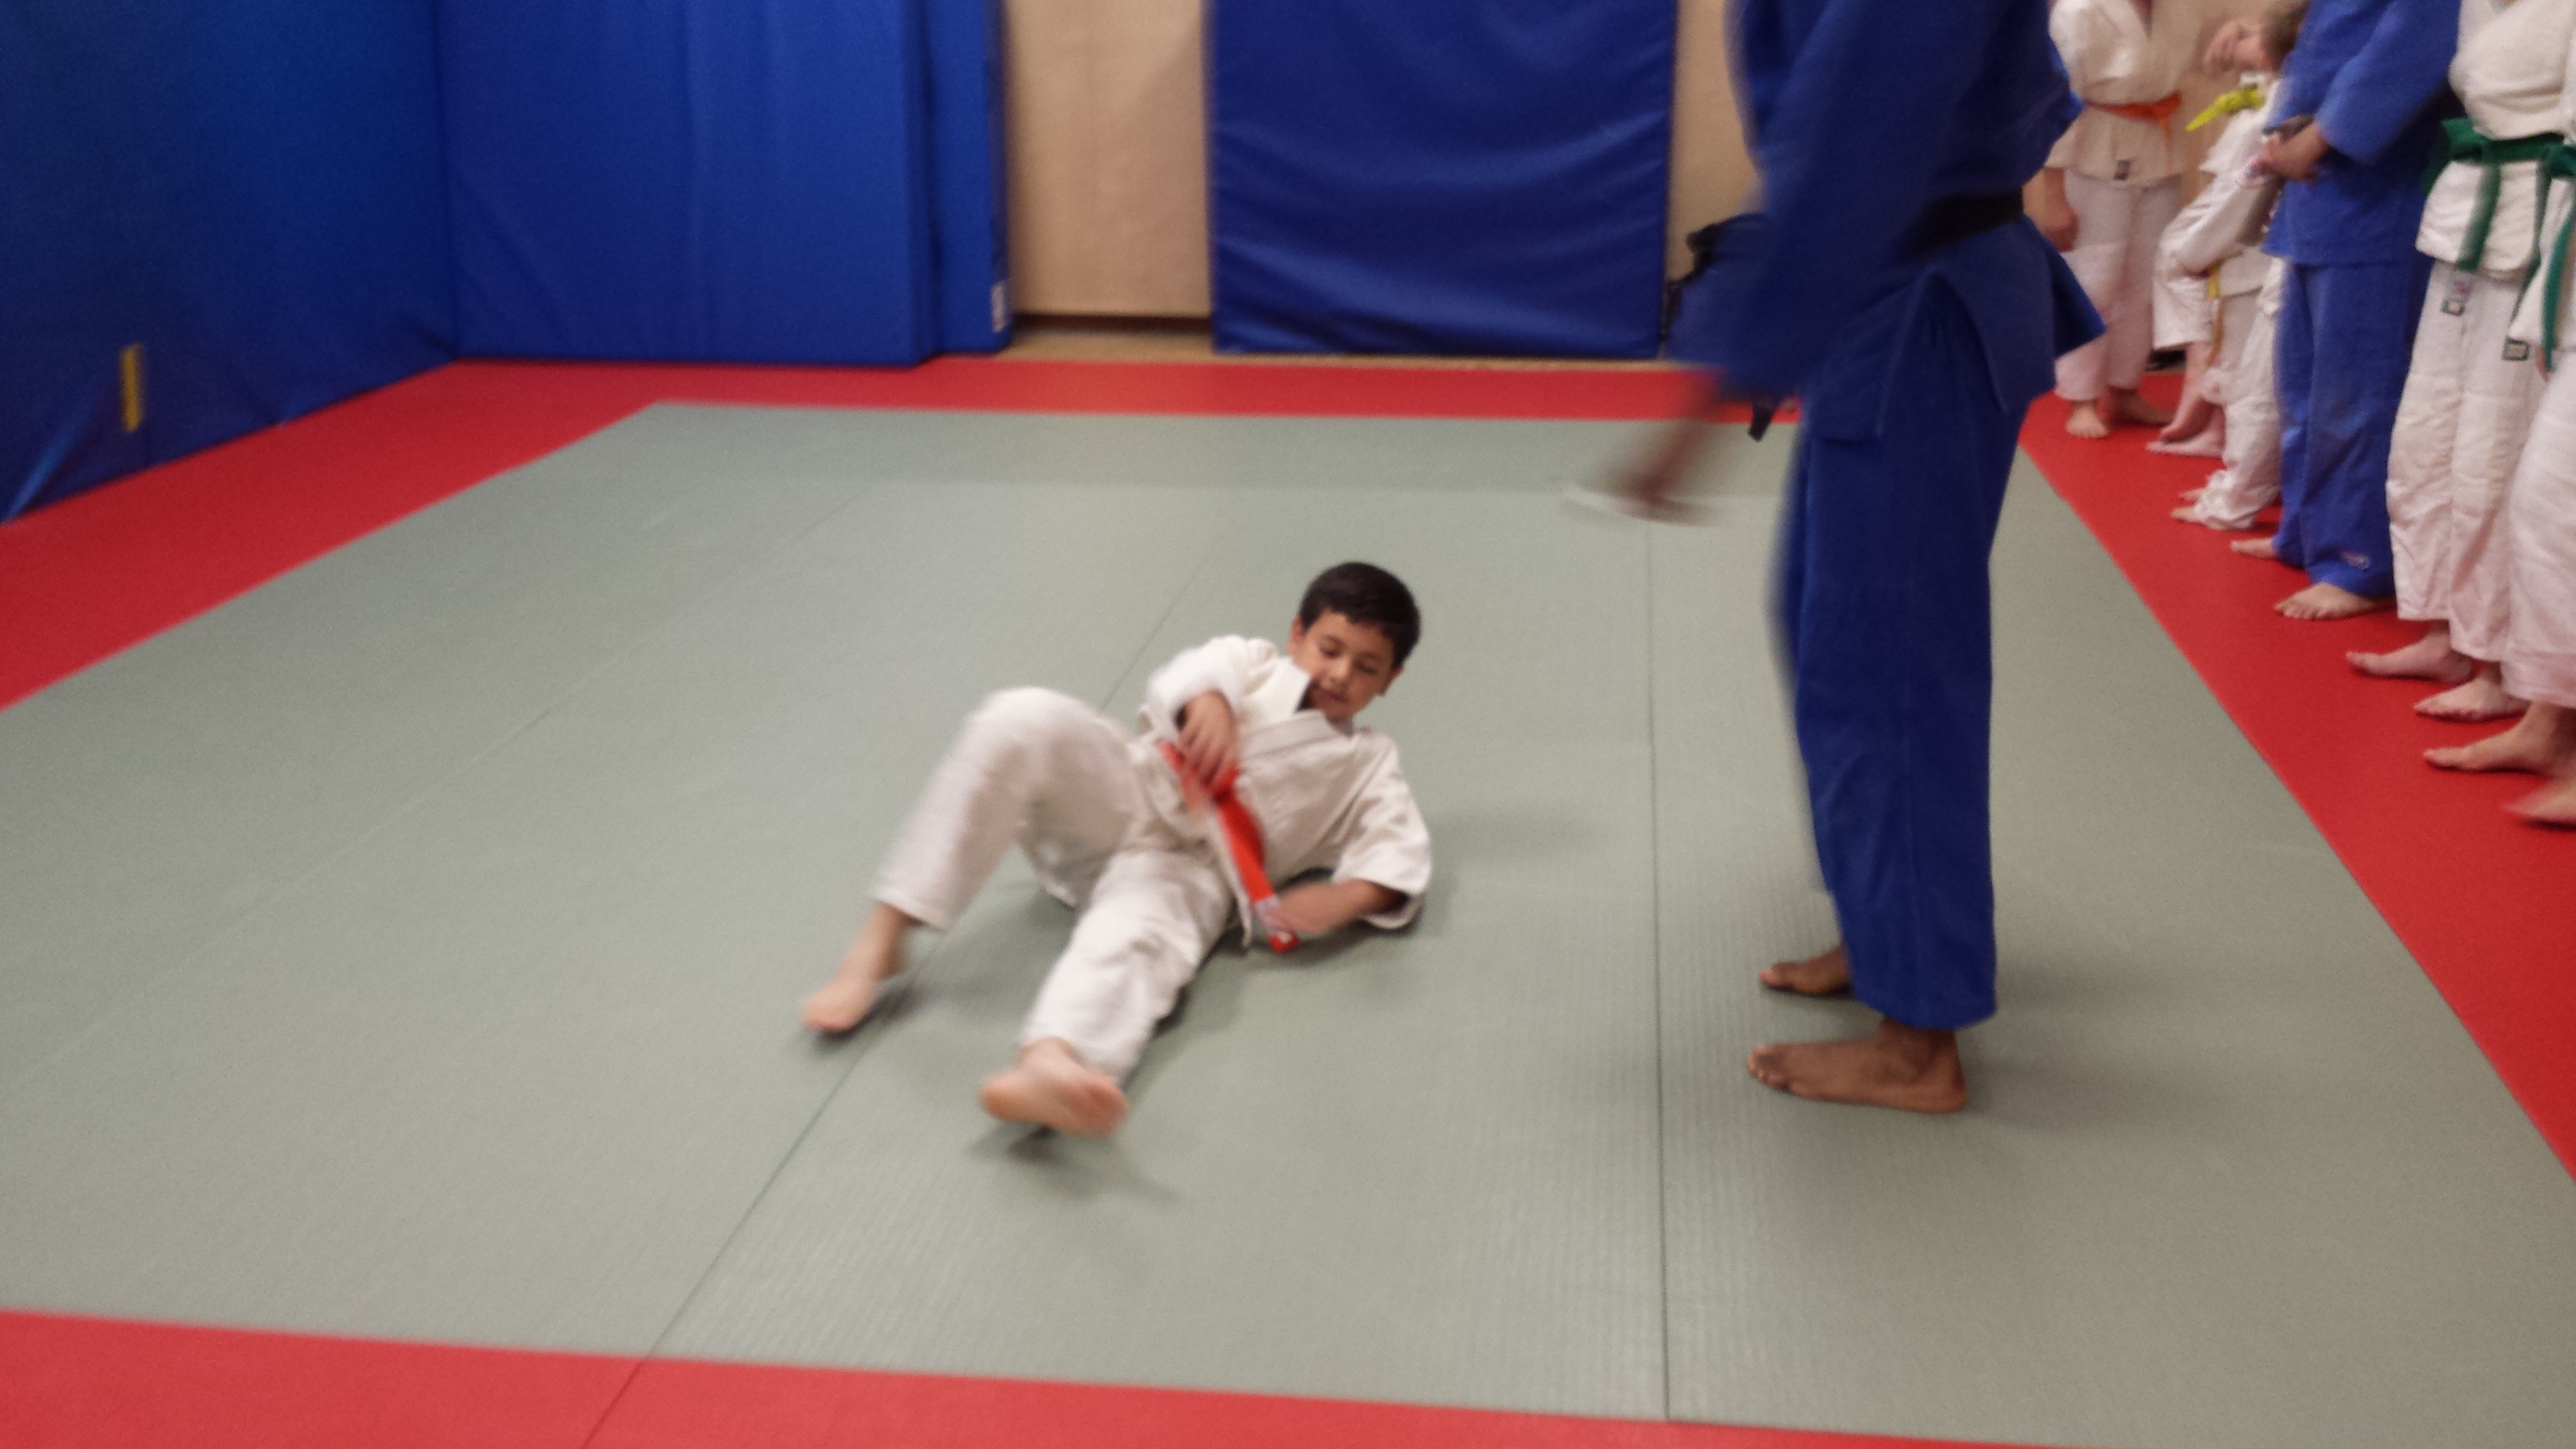 Judo roll out